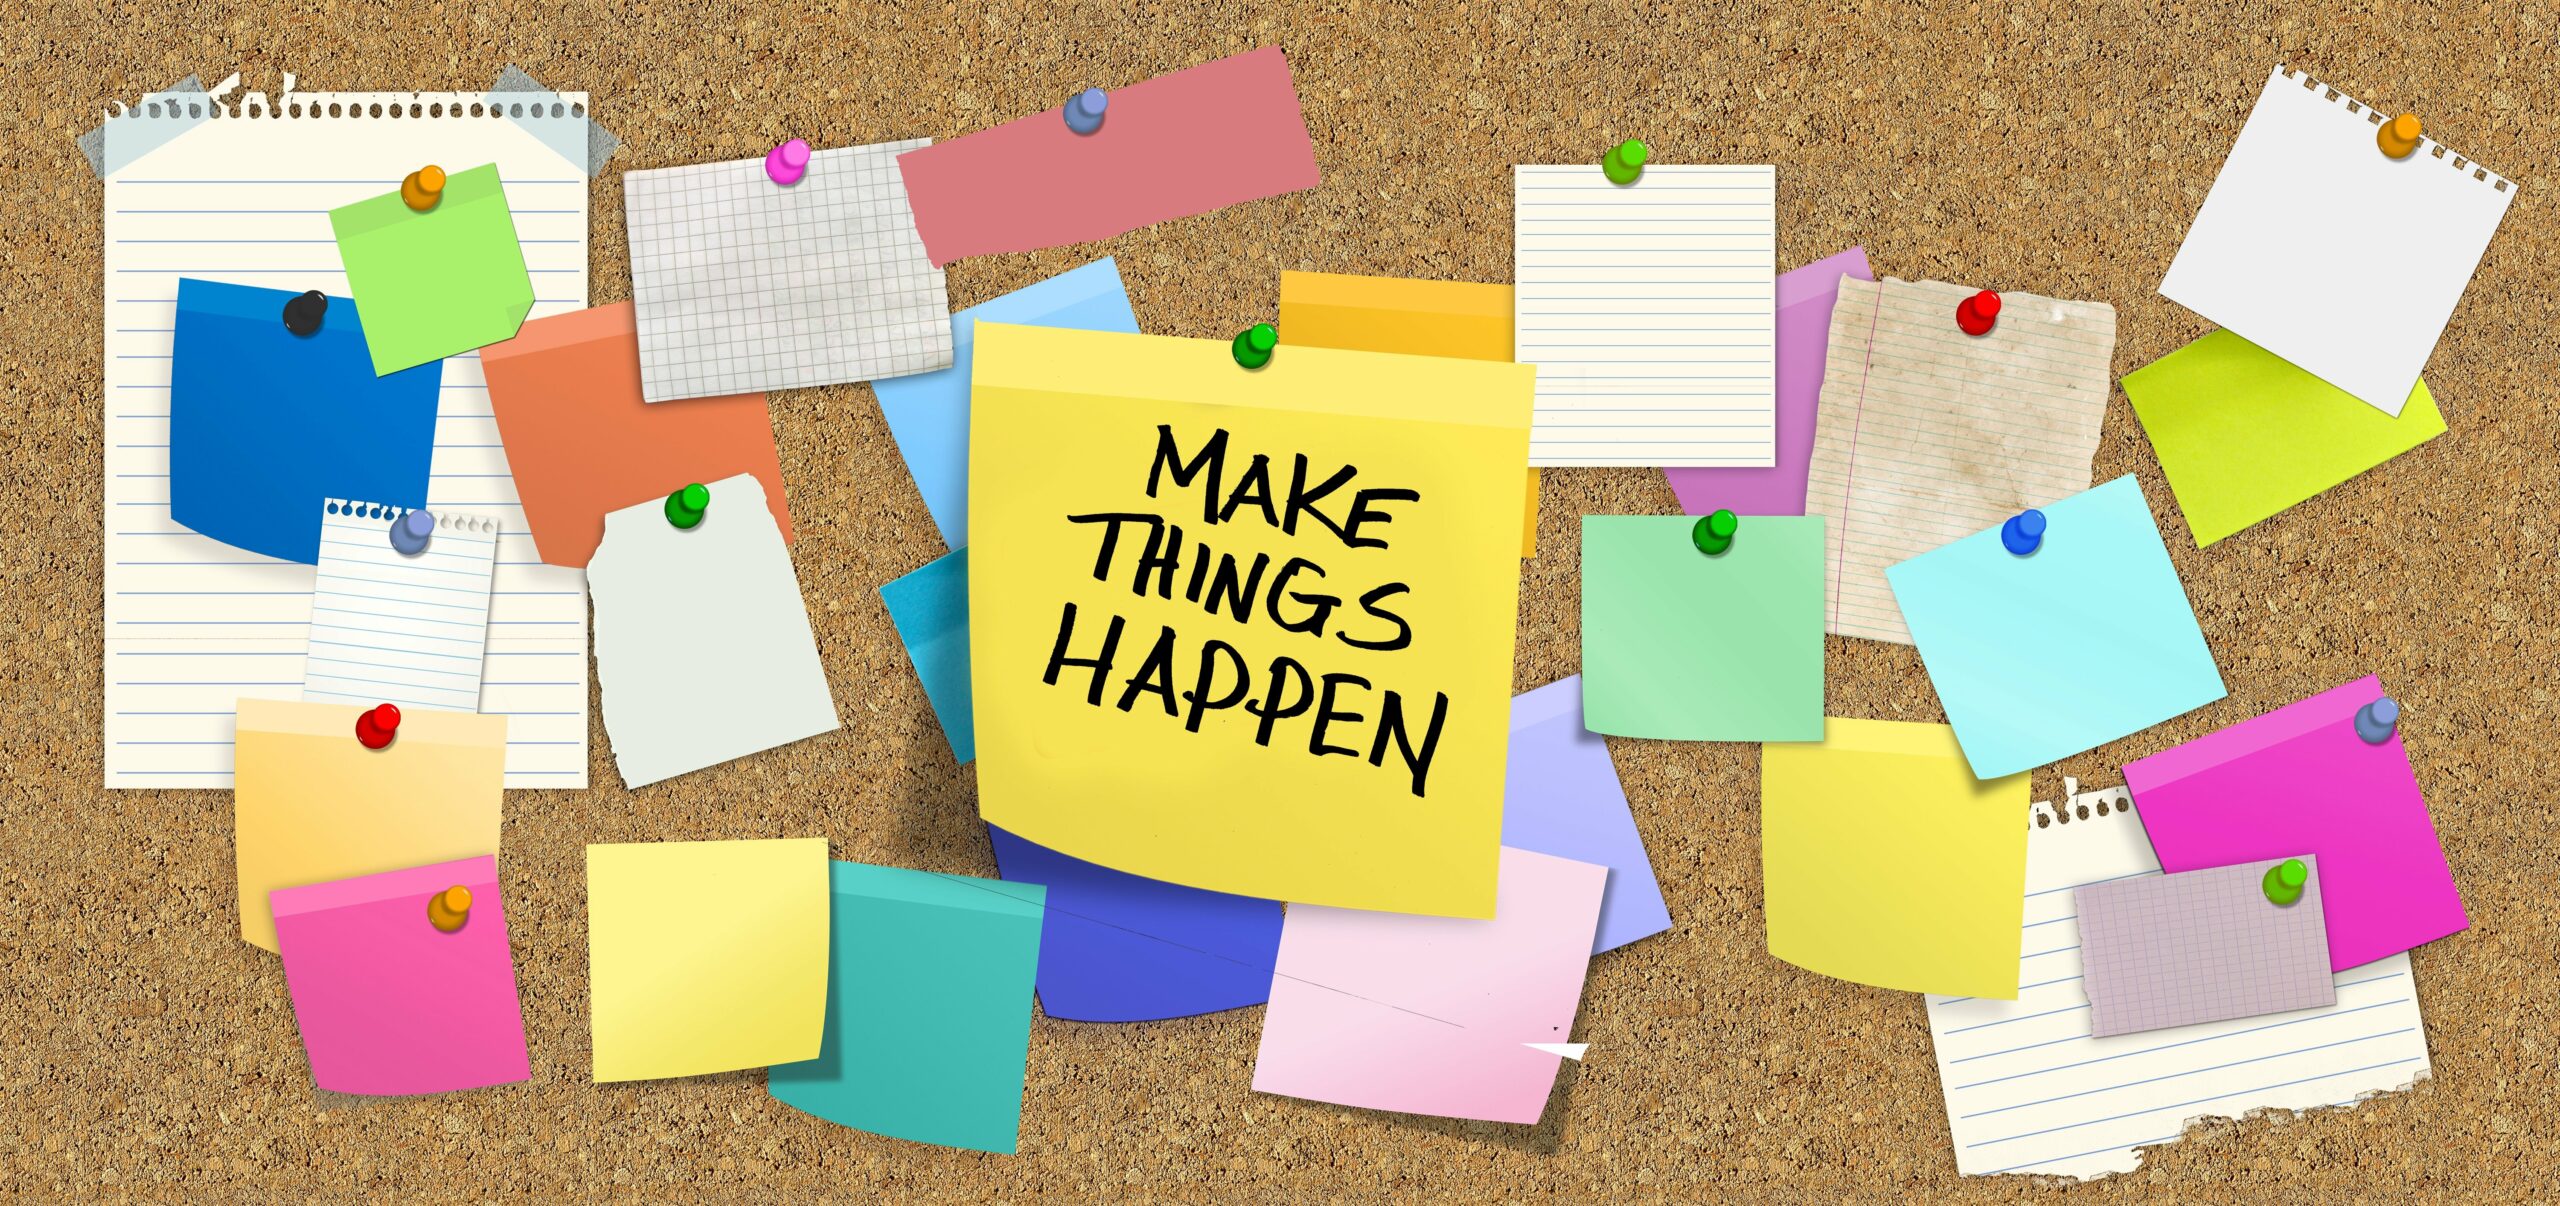 A bulletin board full of post its with one post it that says make things happen